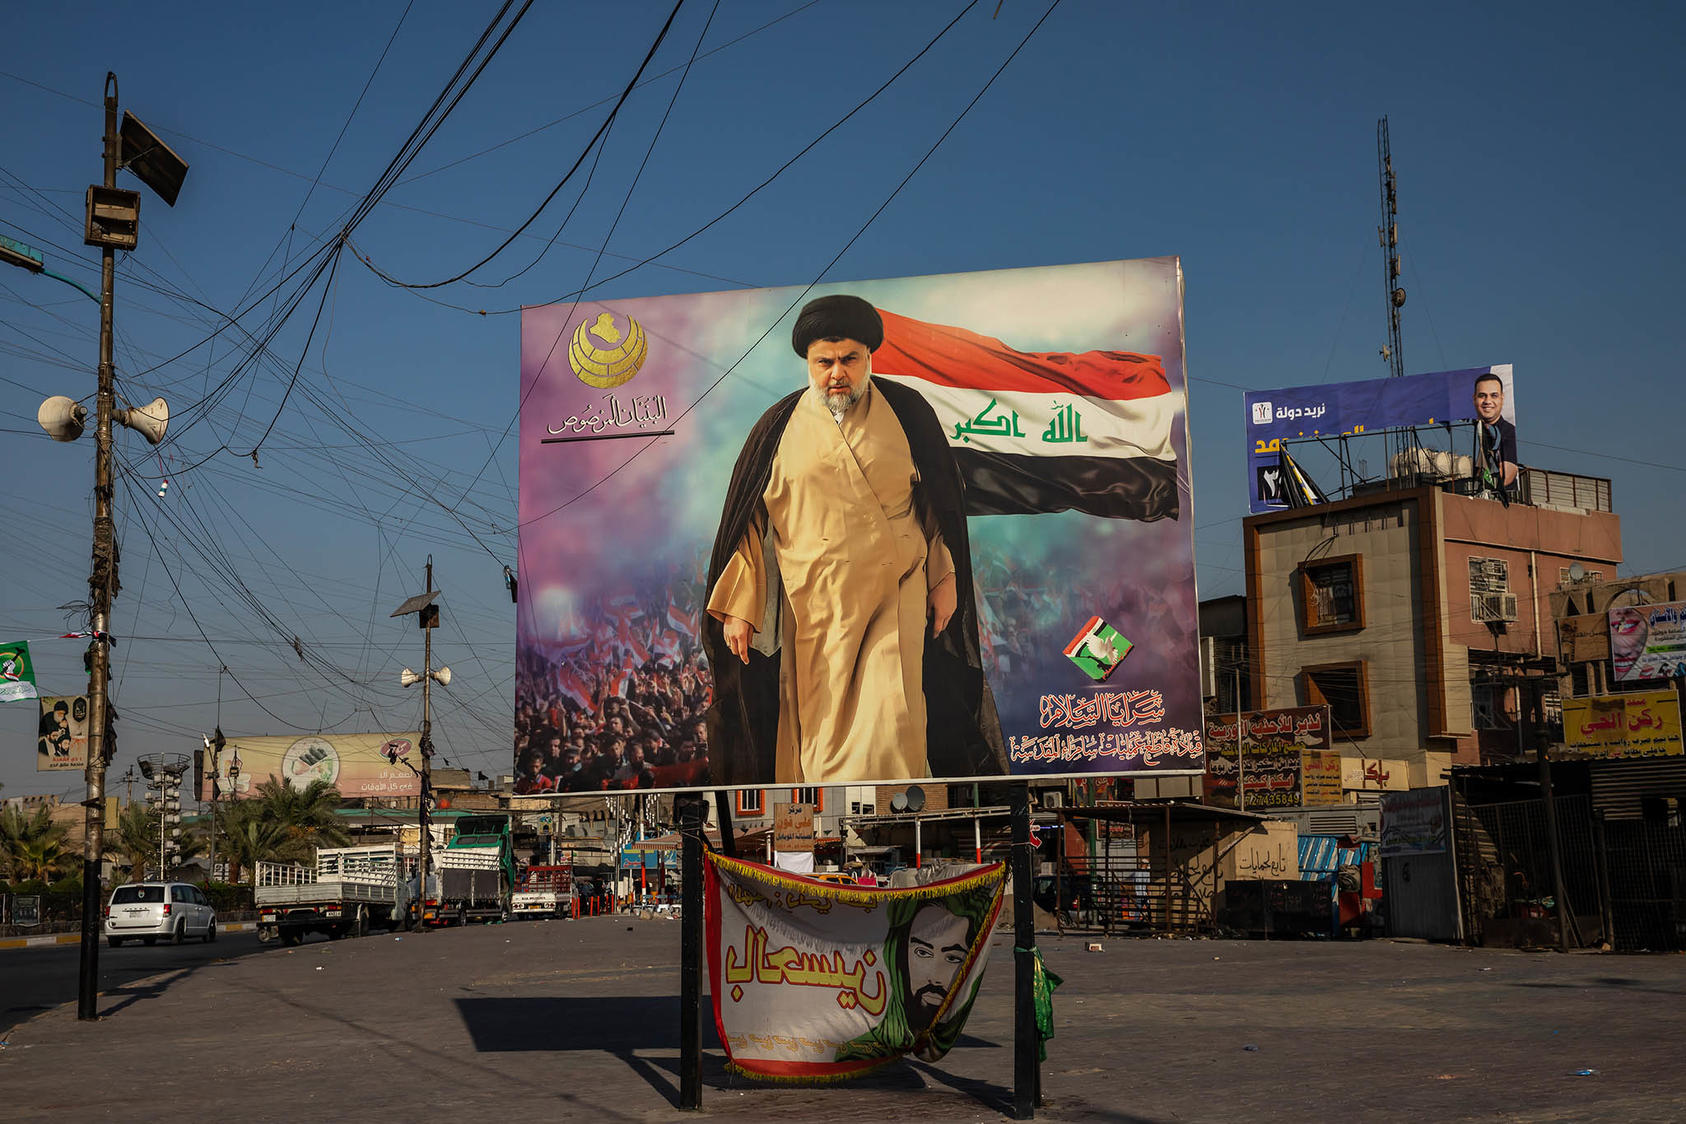 A poster of Shia cleric Moqtada al-Sadr in the Sadr City neighborhood of Baghdad, Sept. 30, 2021. (Andrea DiCenzo/The New York Times)